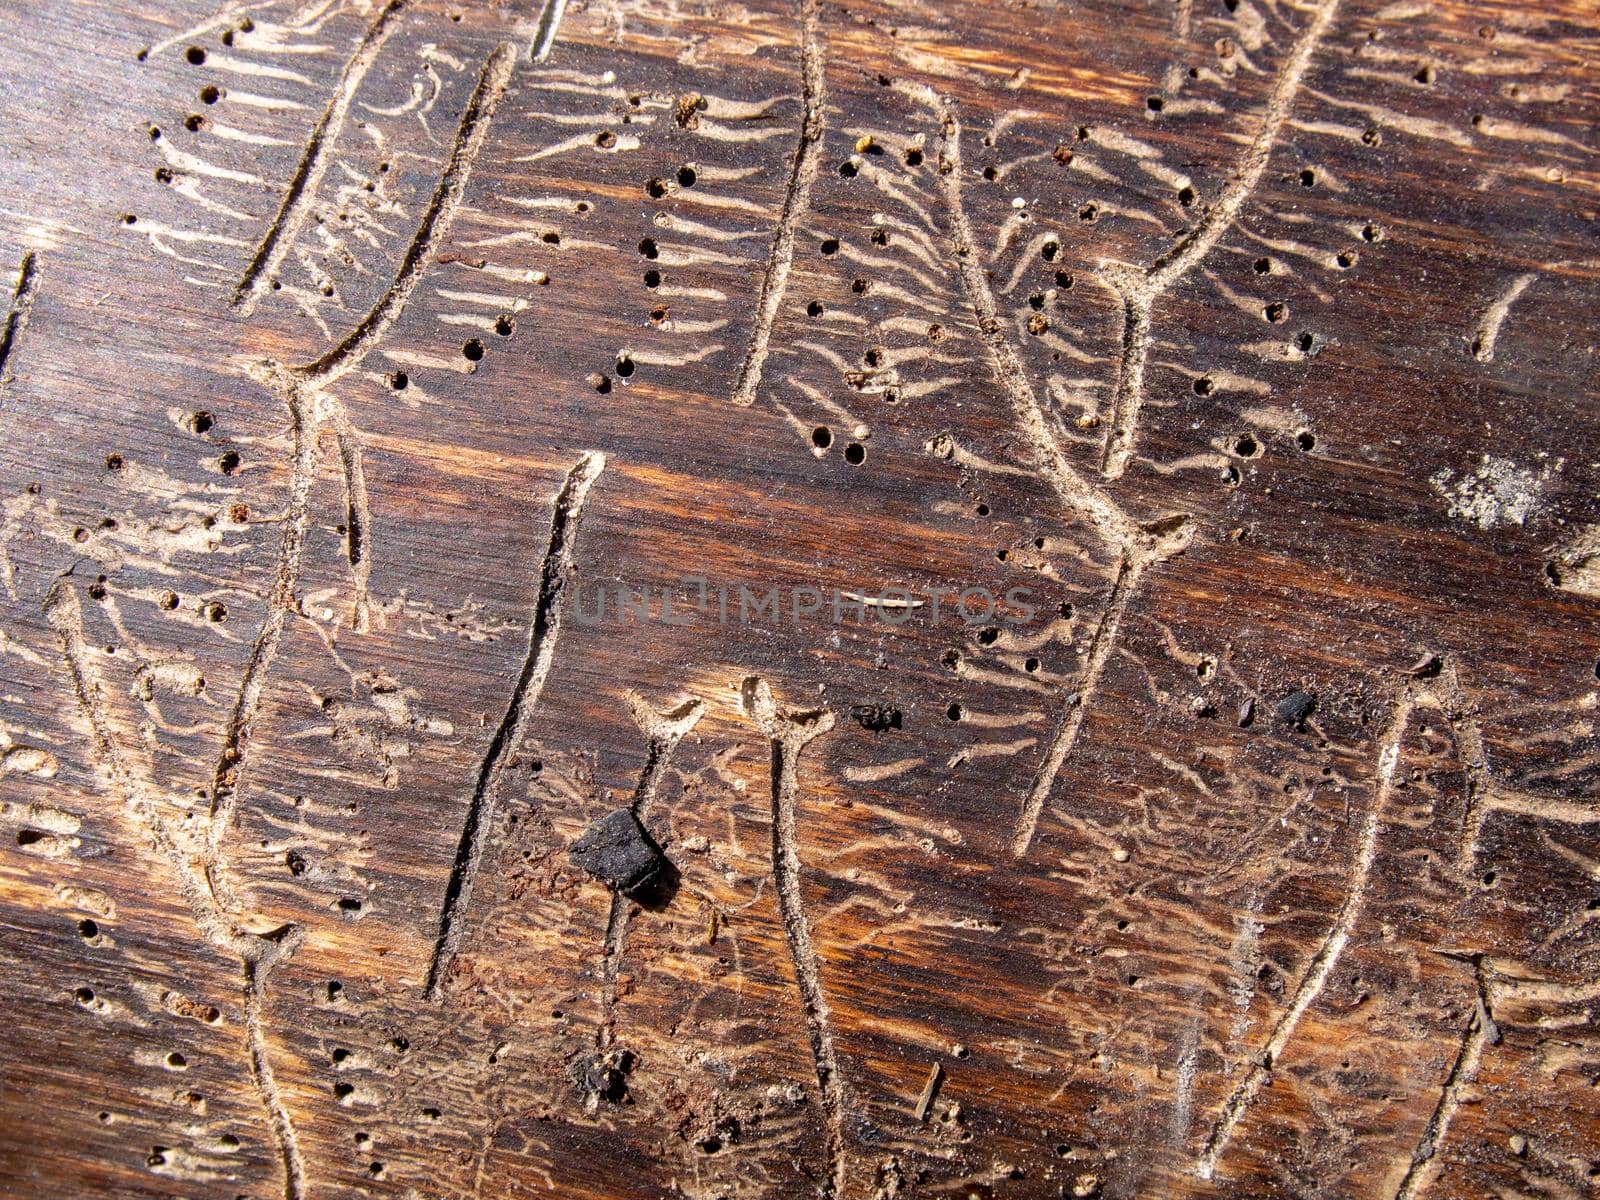 Patterns of various shapes on wood, left by the bark beetle. The tree was eaten by the bark beetle. by Andre1ns